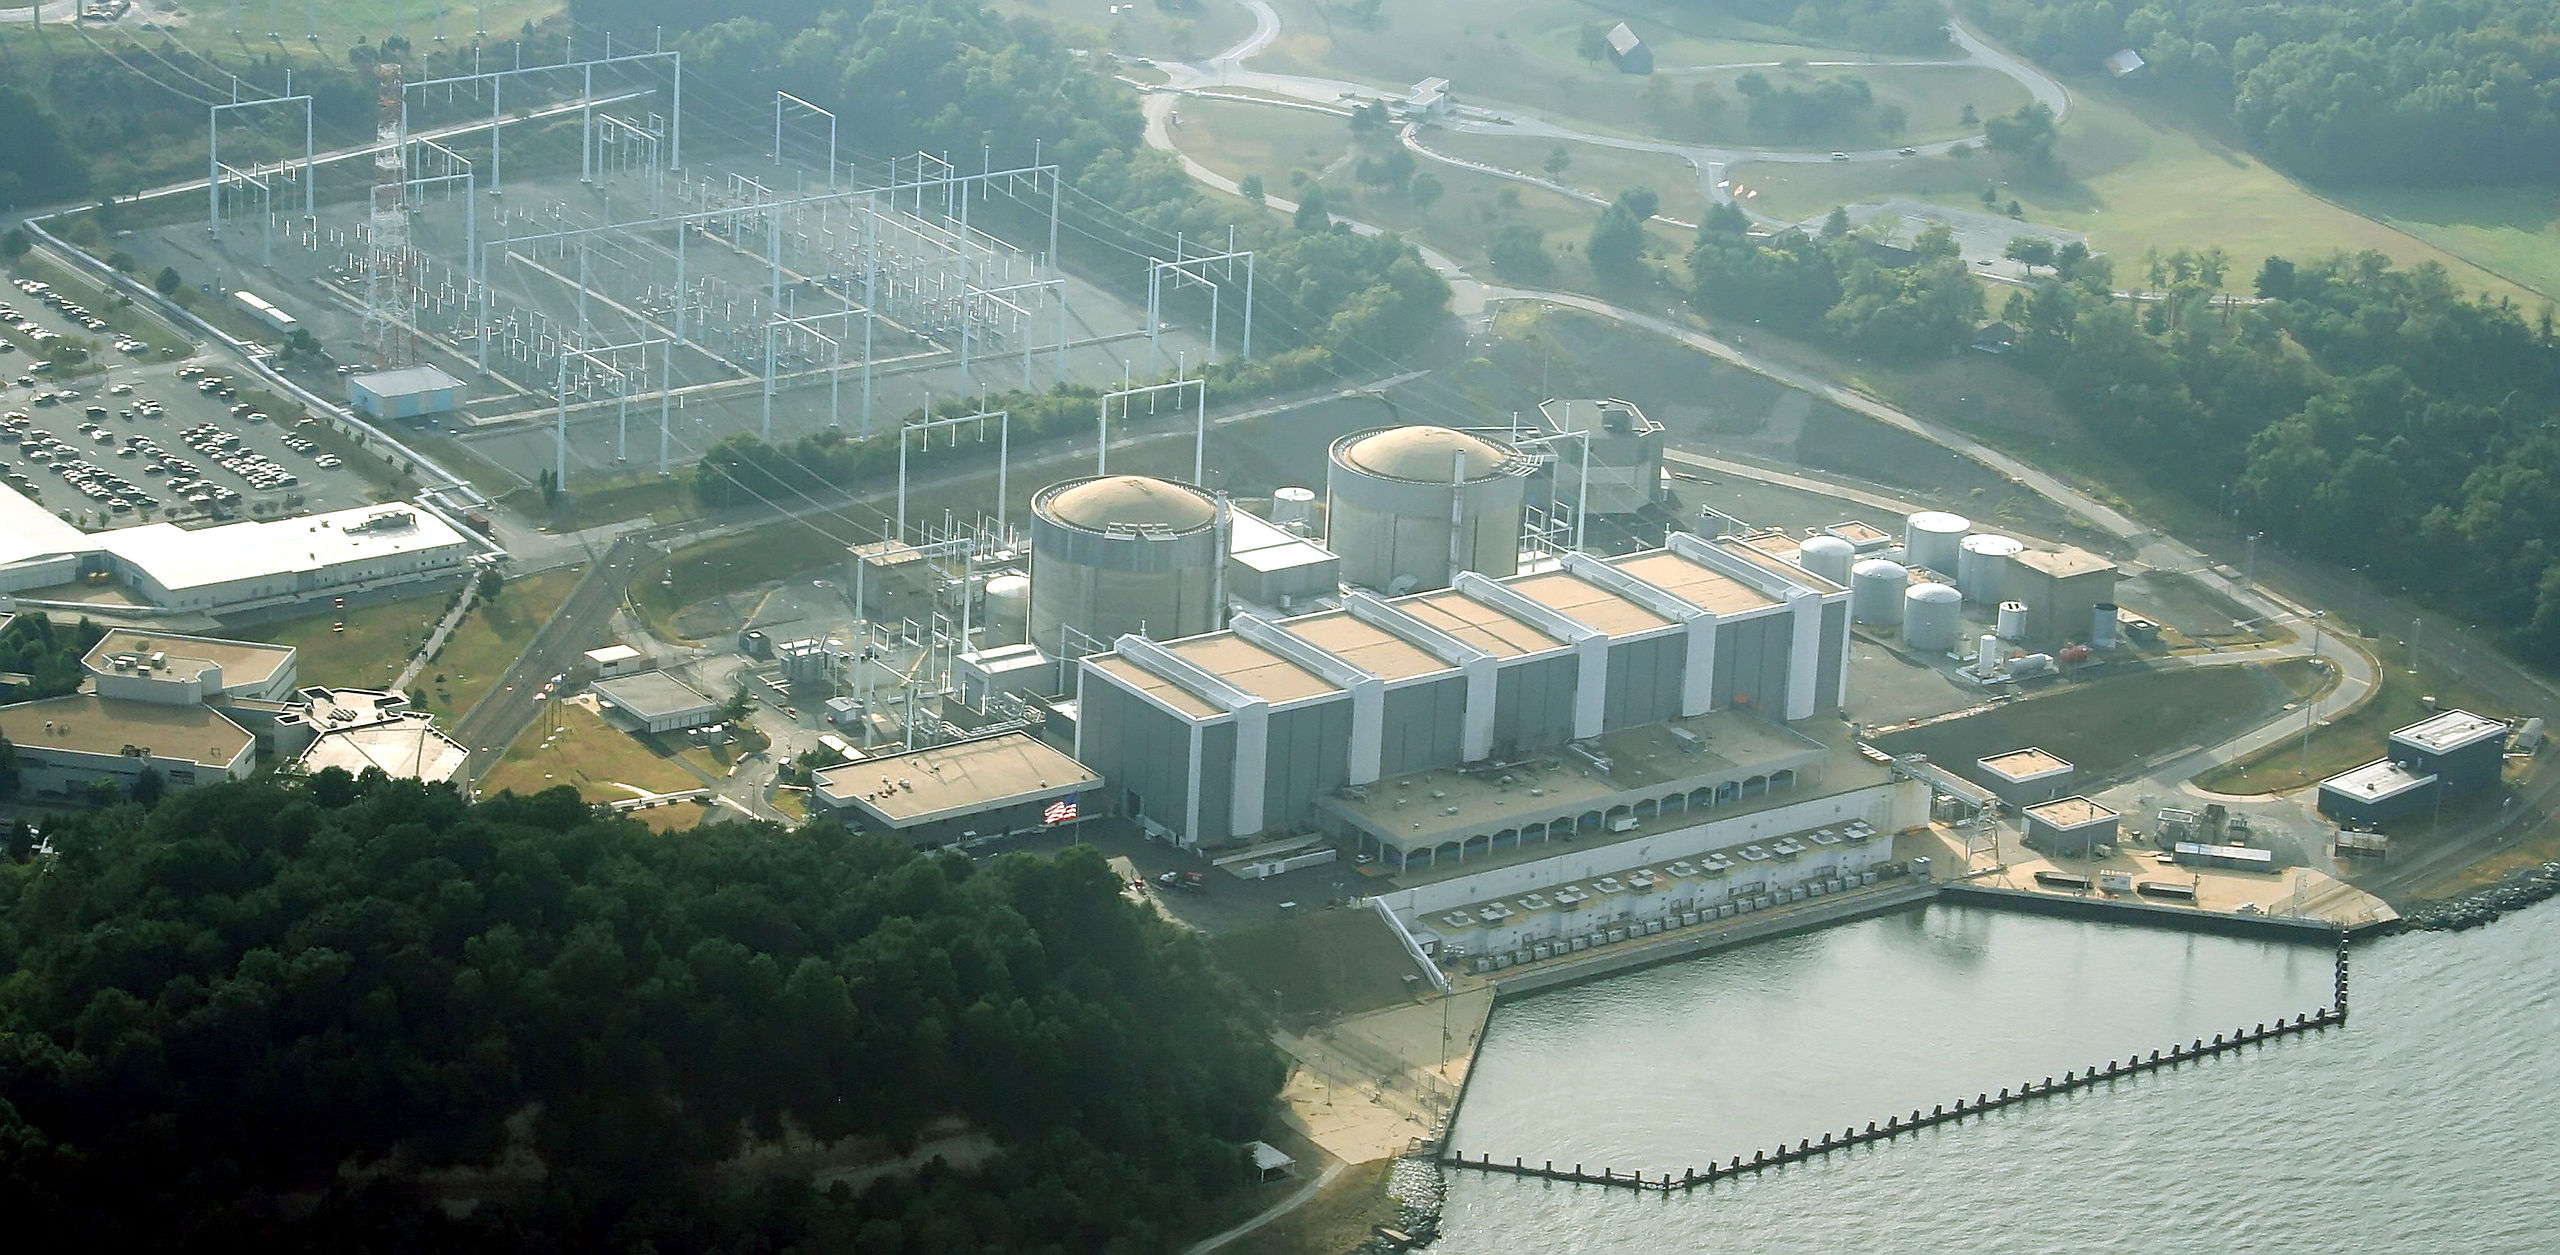 2000 – The NRC Issued the First-Ever License Renewal to Constellation Energy’s Calvert Cliffs Nuclear Power Plant